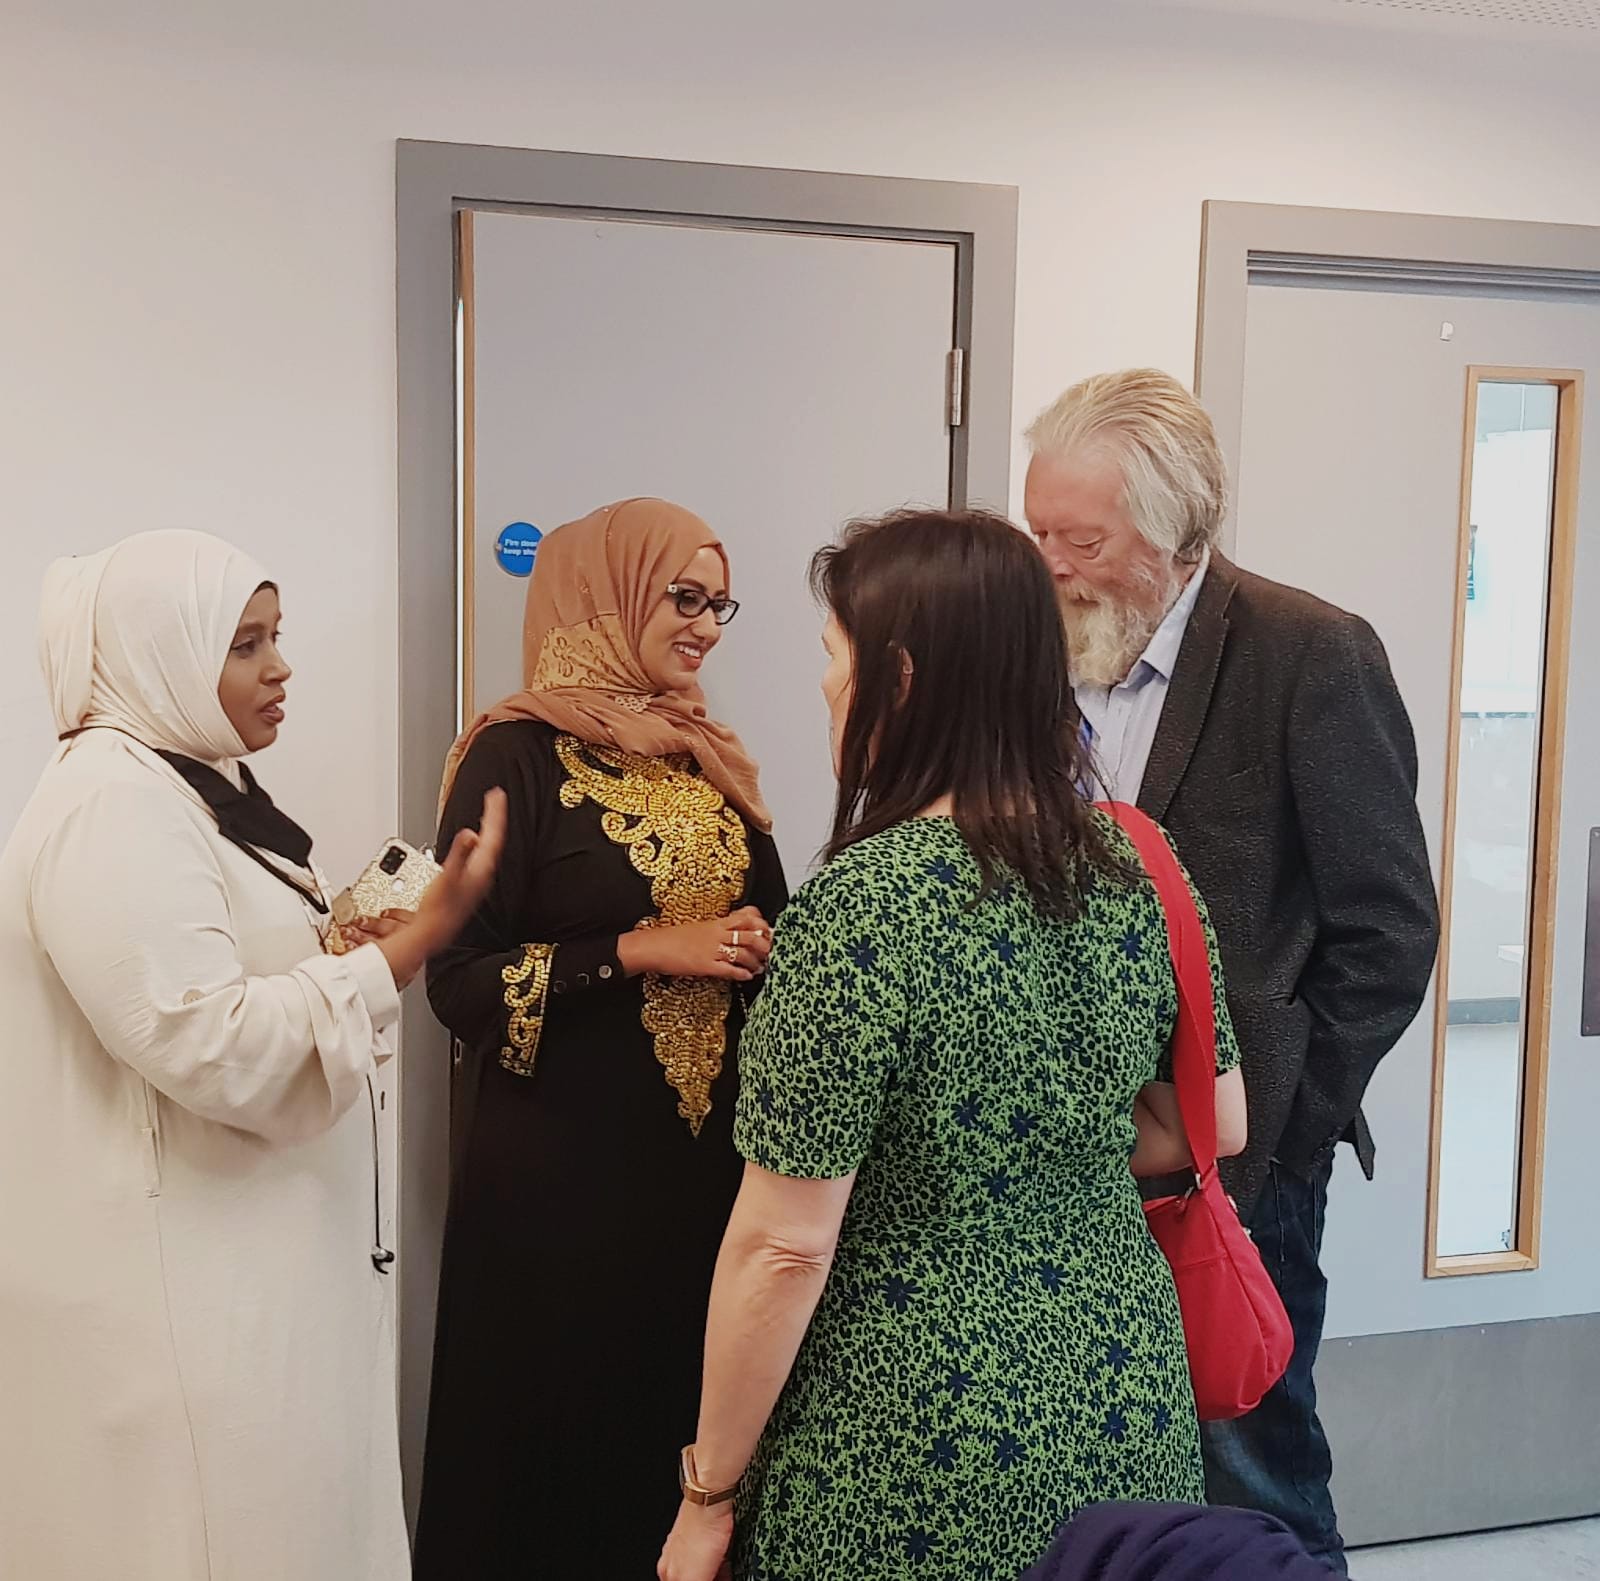 Cllr Ann Clark, Assembly Member of Barnet and Camden, Barry Rawlings Leader of the Labour Party in Barnet, Amina Khalid and one of the participants in dialogue.